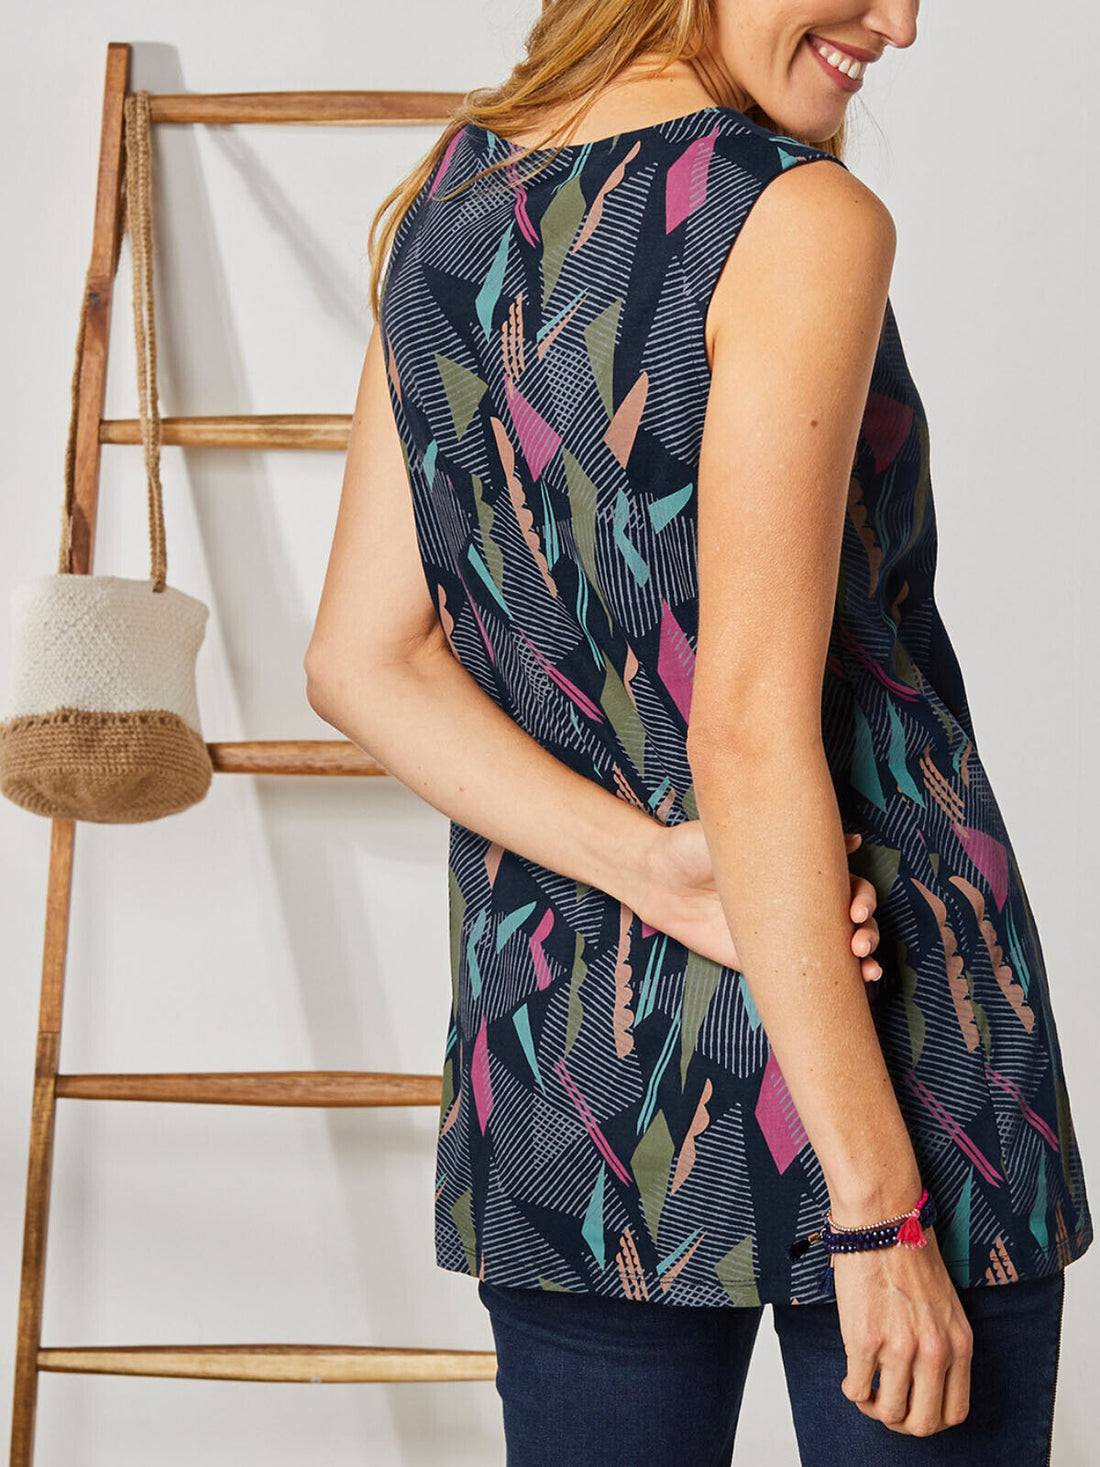 Blancheporte Navy Abstract Print Sleeveless Top in Sizes 14/16, 18/20, 22, 24